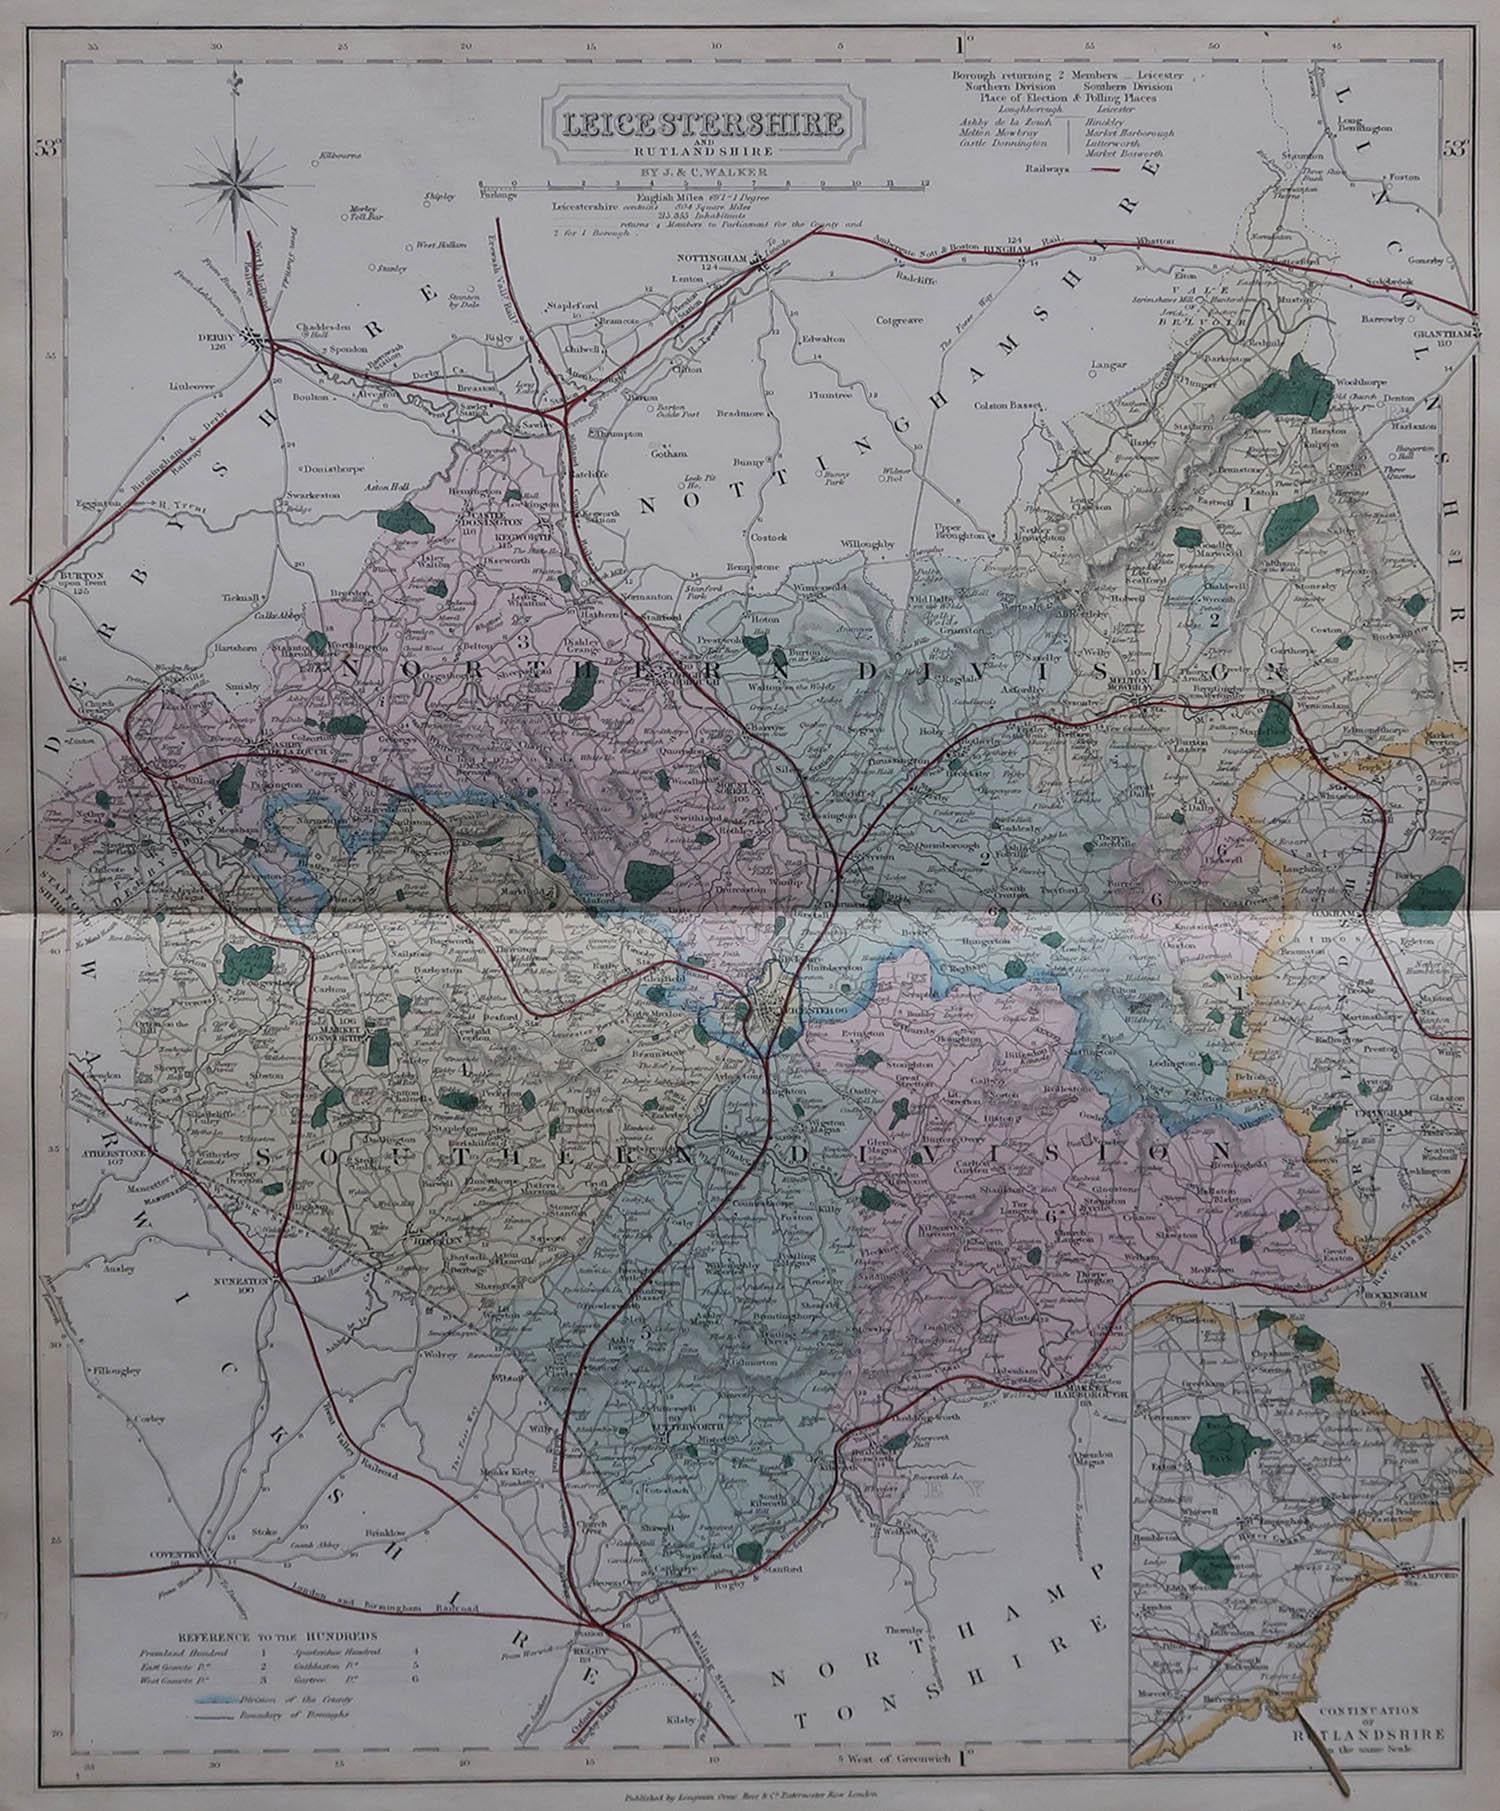 Great map of Leicestershire

Original colour

By J & C Walker

Published by Longman, Rees, Orme, Brown & Co. 1851

Unframed.




